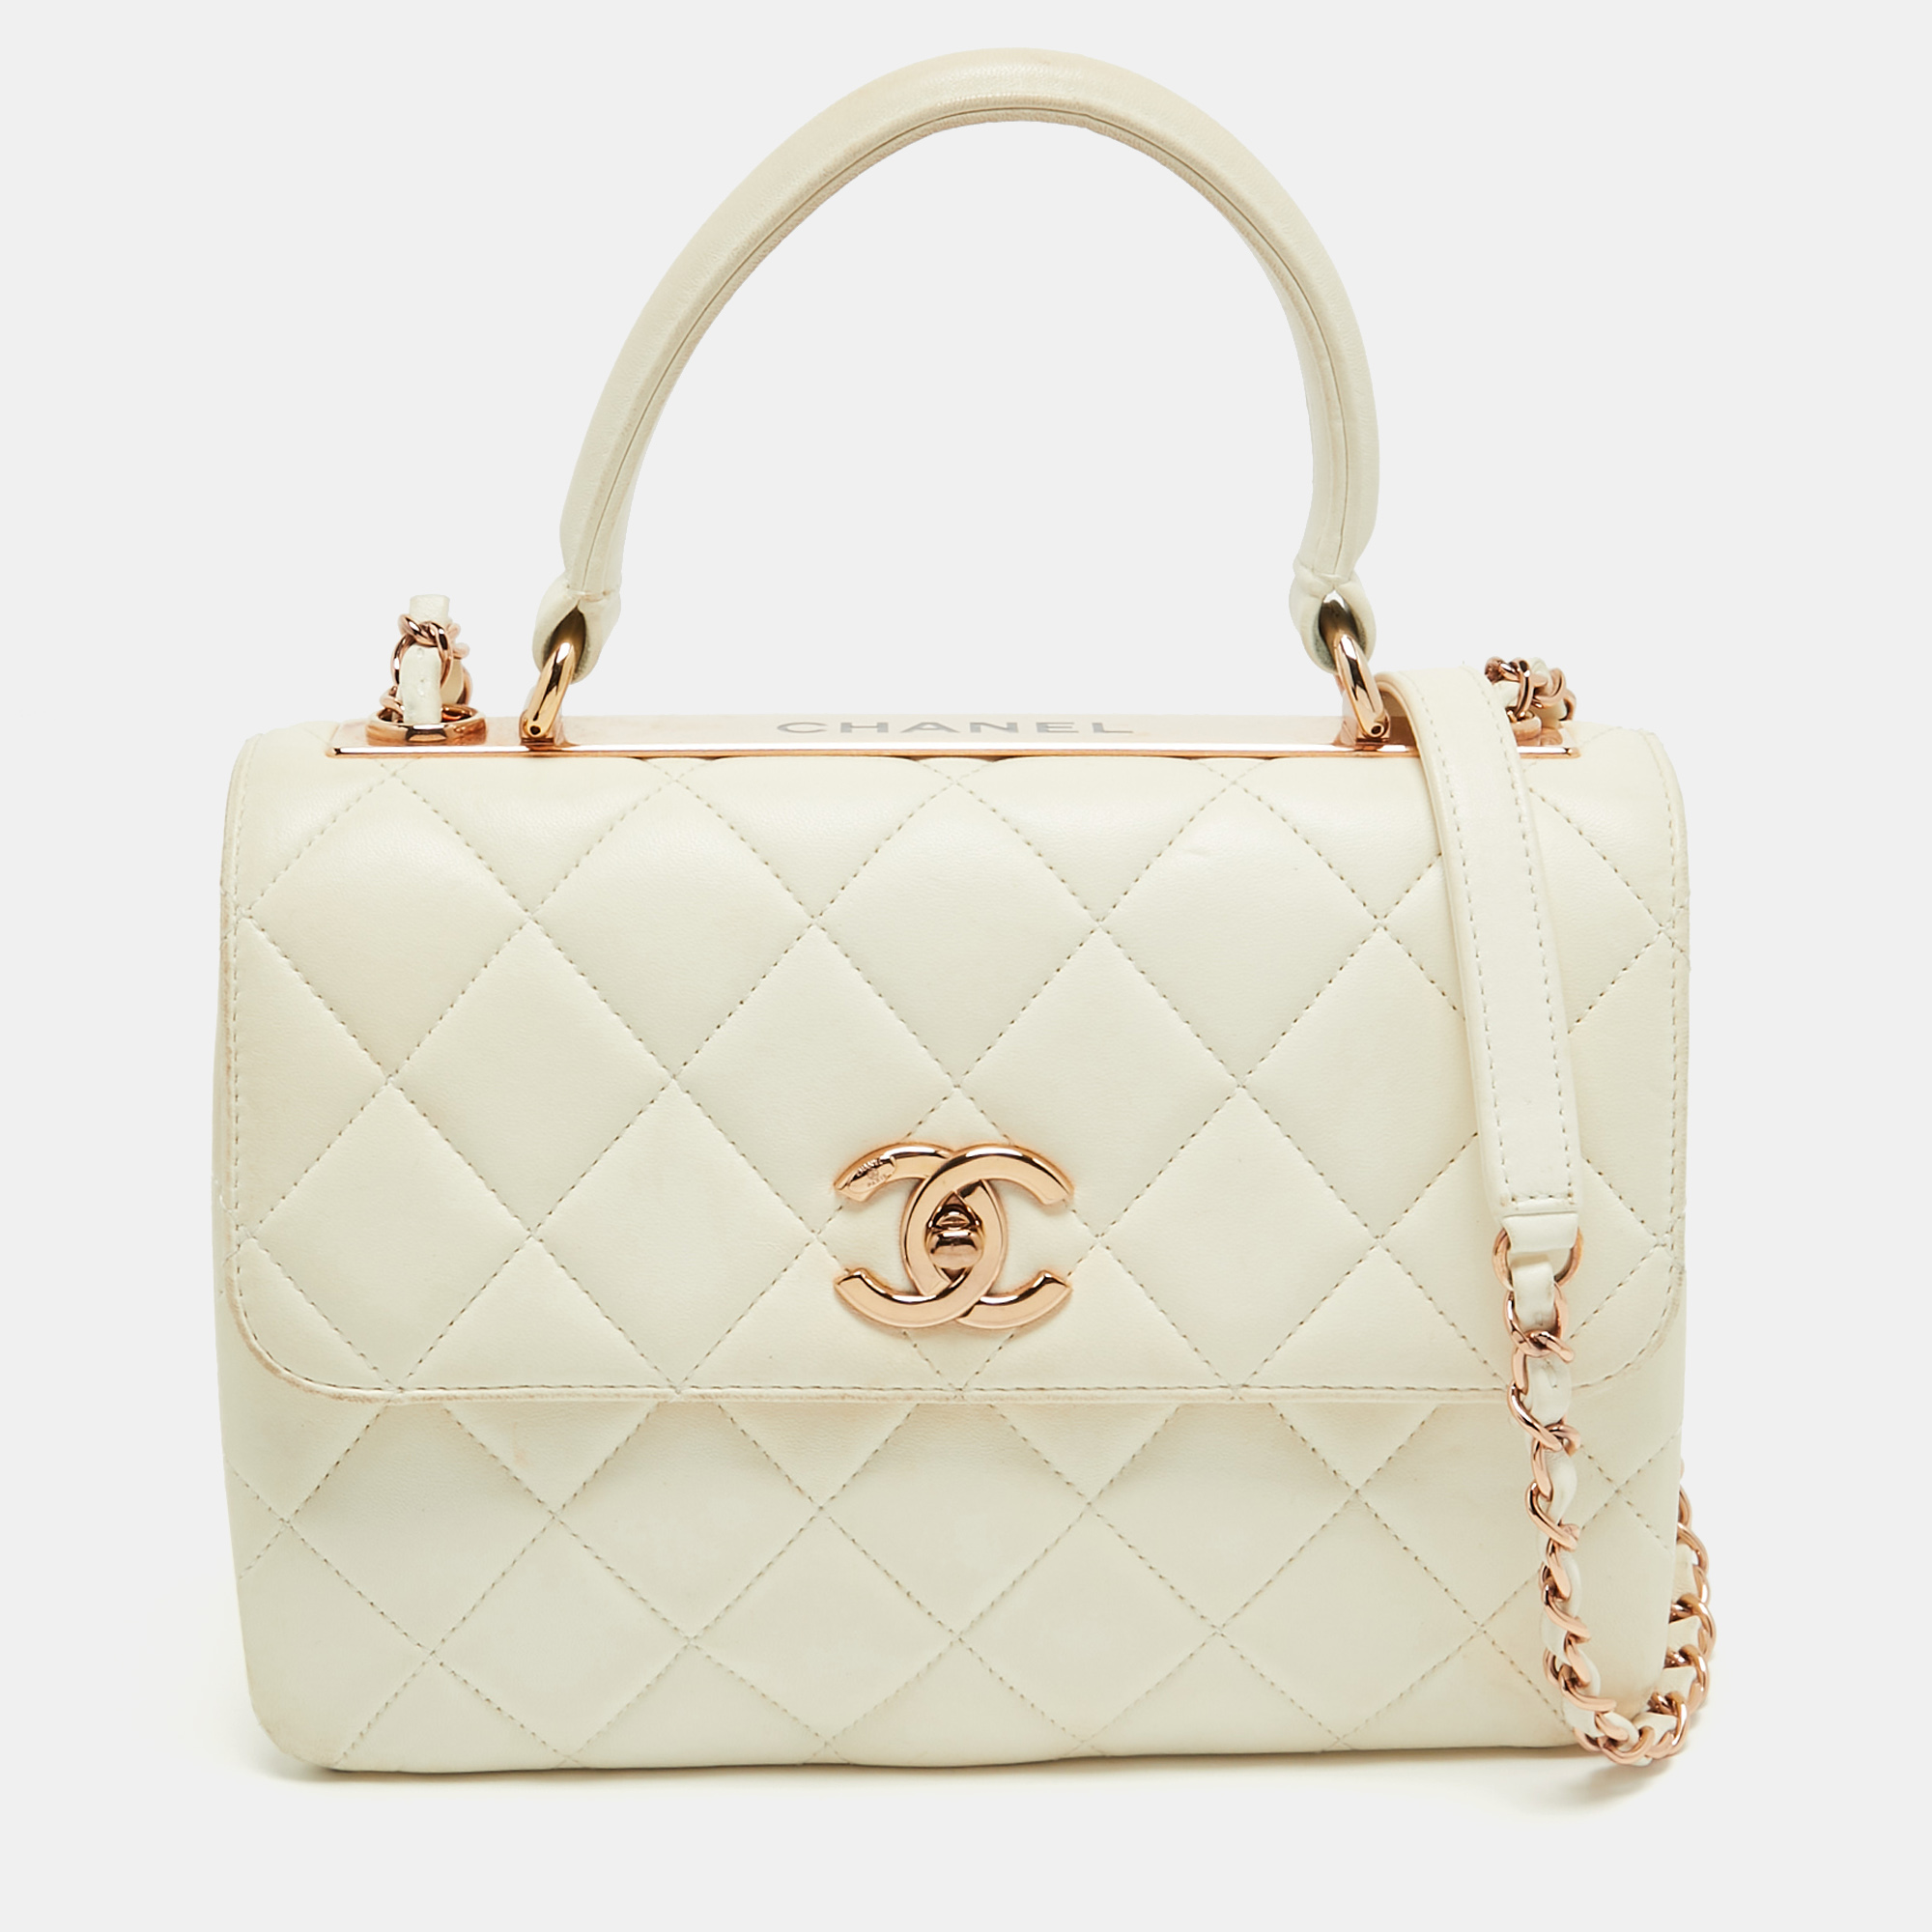 Chanel off white quilted leather small trendy cc flap bag